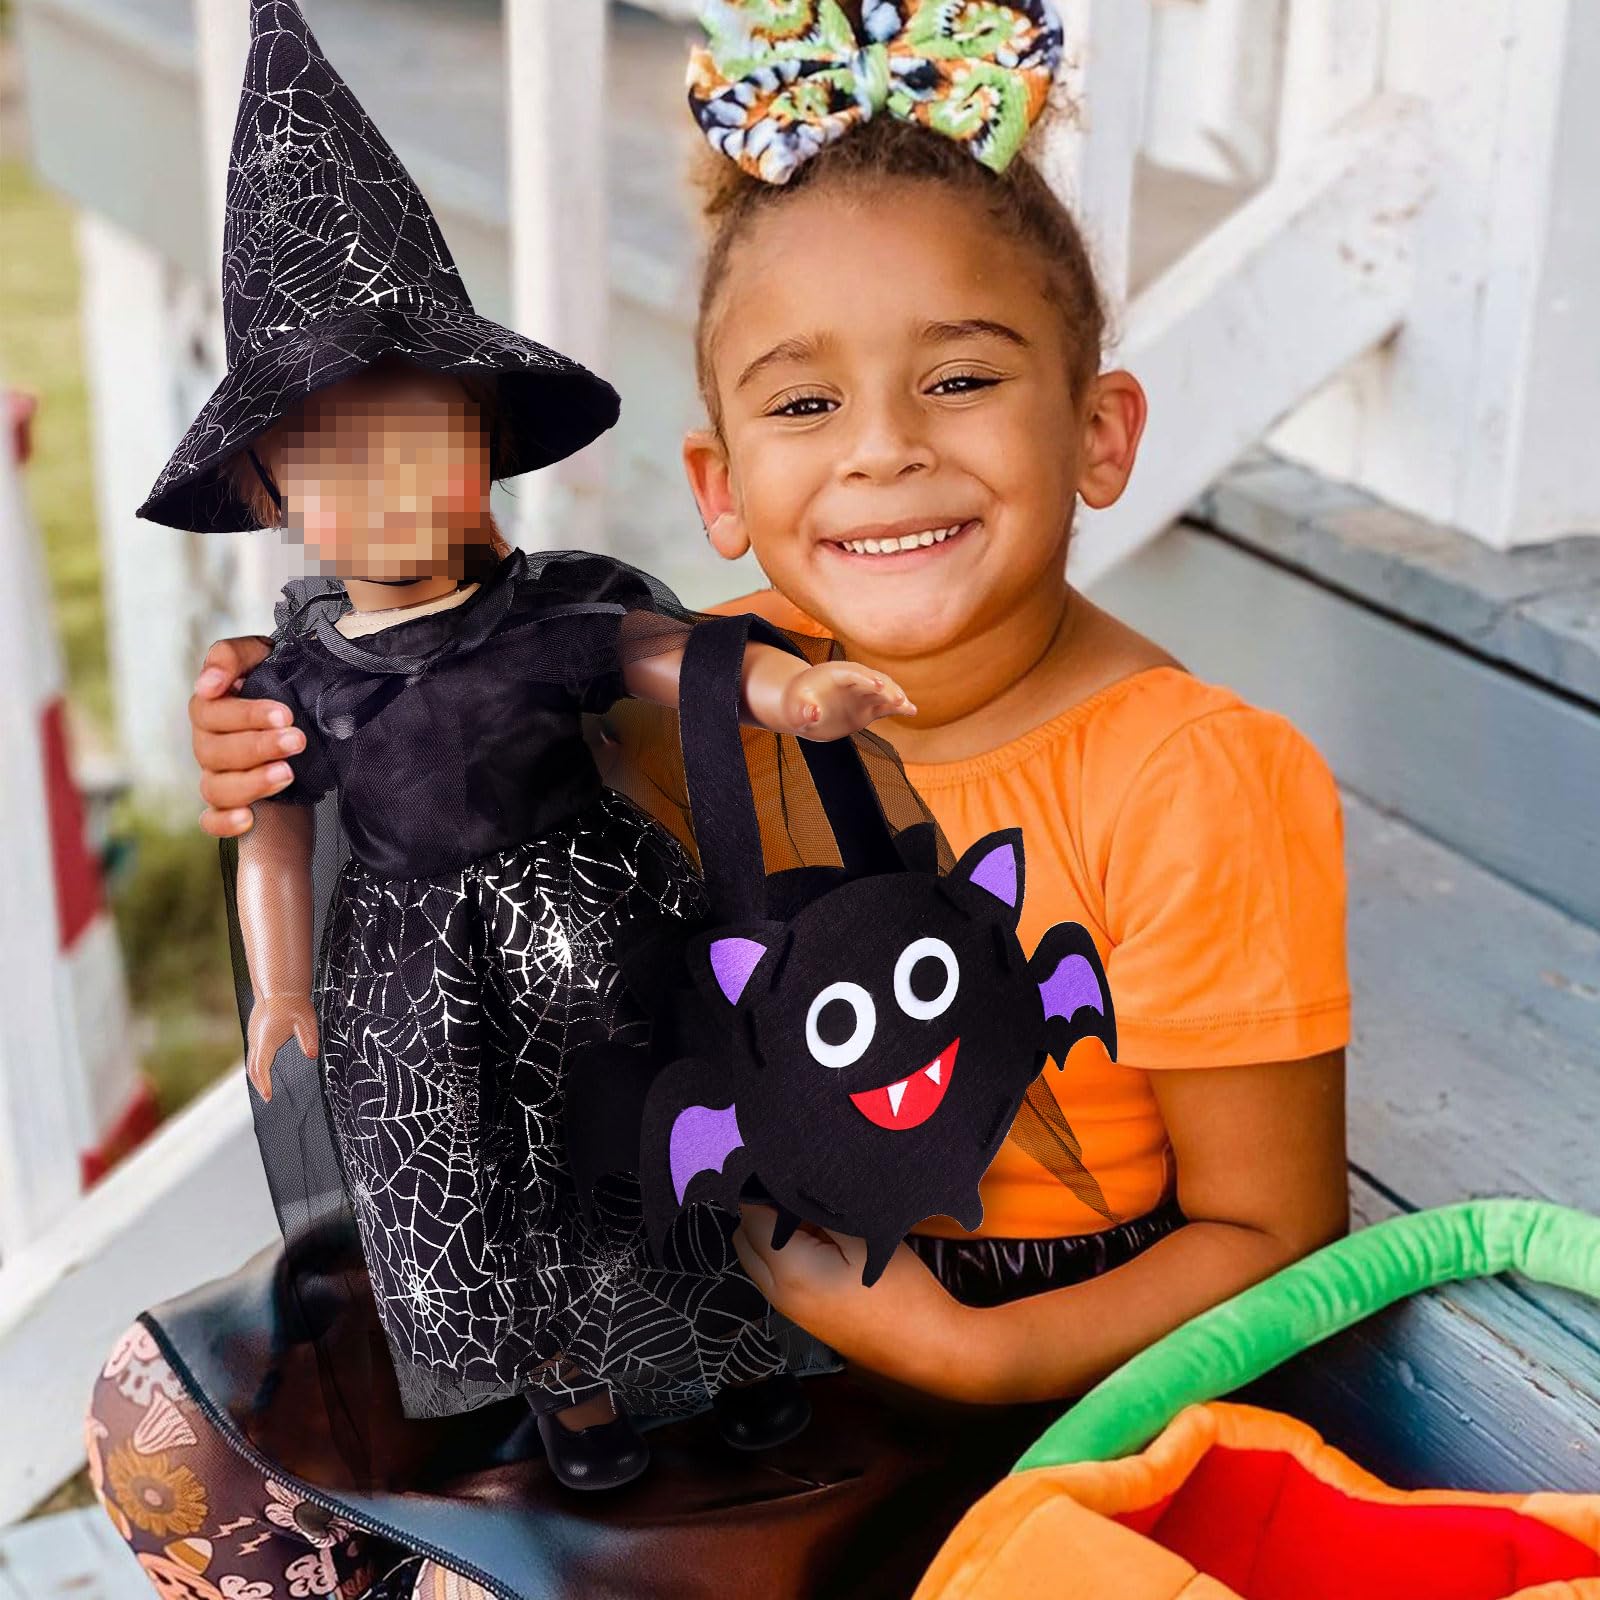 18 inch Doll Clothes and Accessories Halloween Doll Costumes Dress Shoes Outfit with Pumpkin Trick or Treat Bag Fits for Most 18 Inches Girl Dolls (18 inch Black)